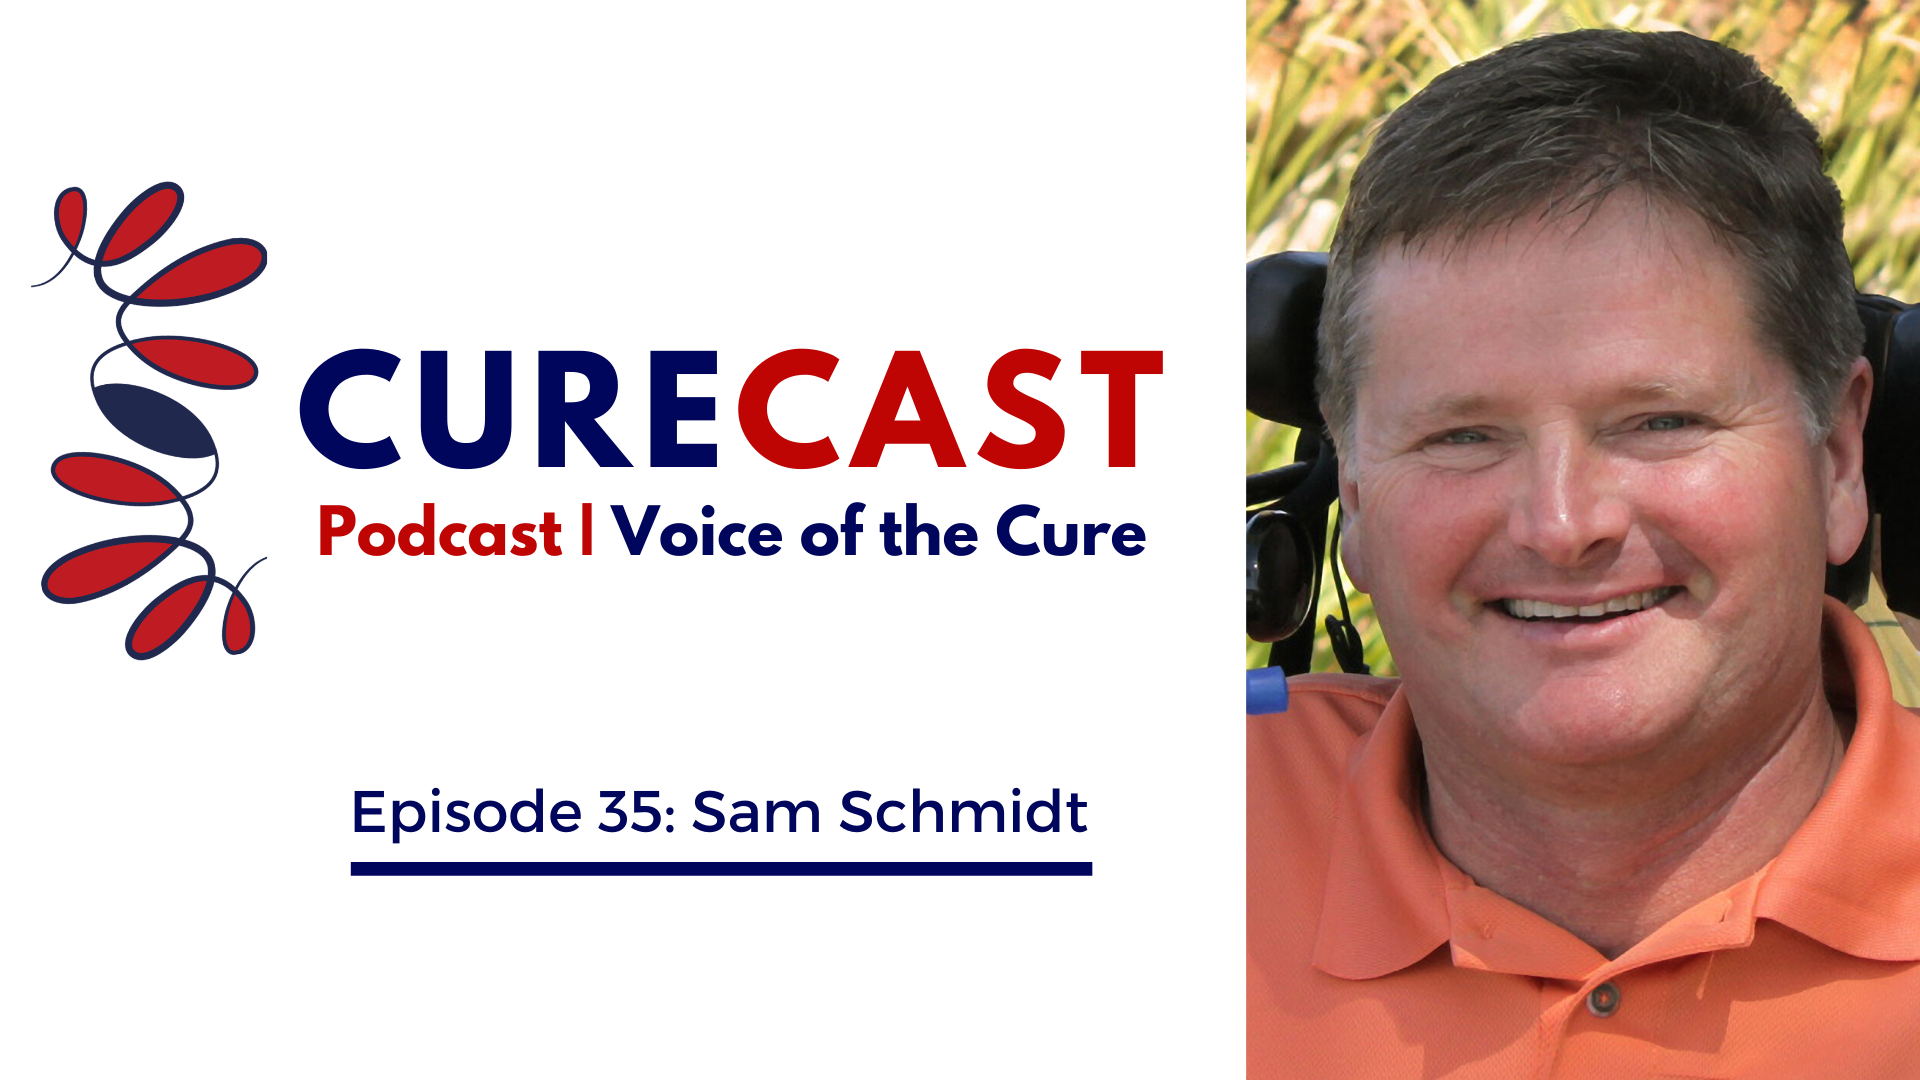 CureCast Episode 35: An Interview with Sam Schmidt, founder of Conquer Paralysis Now